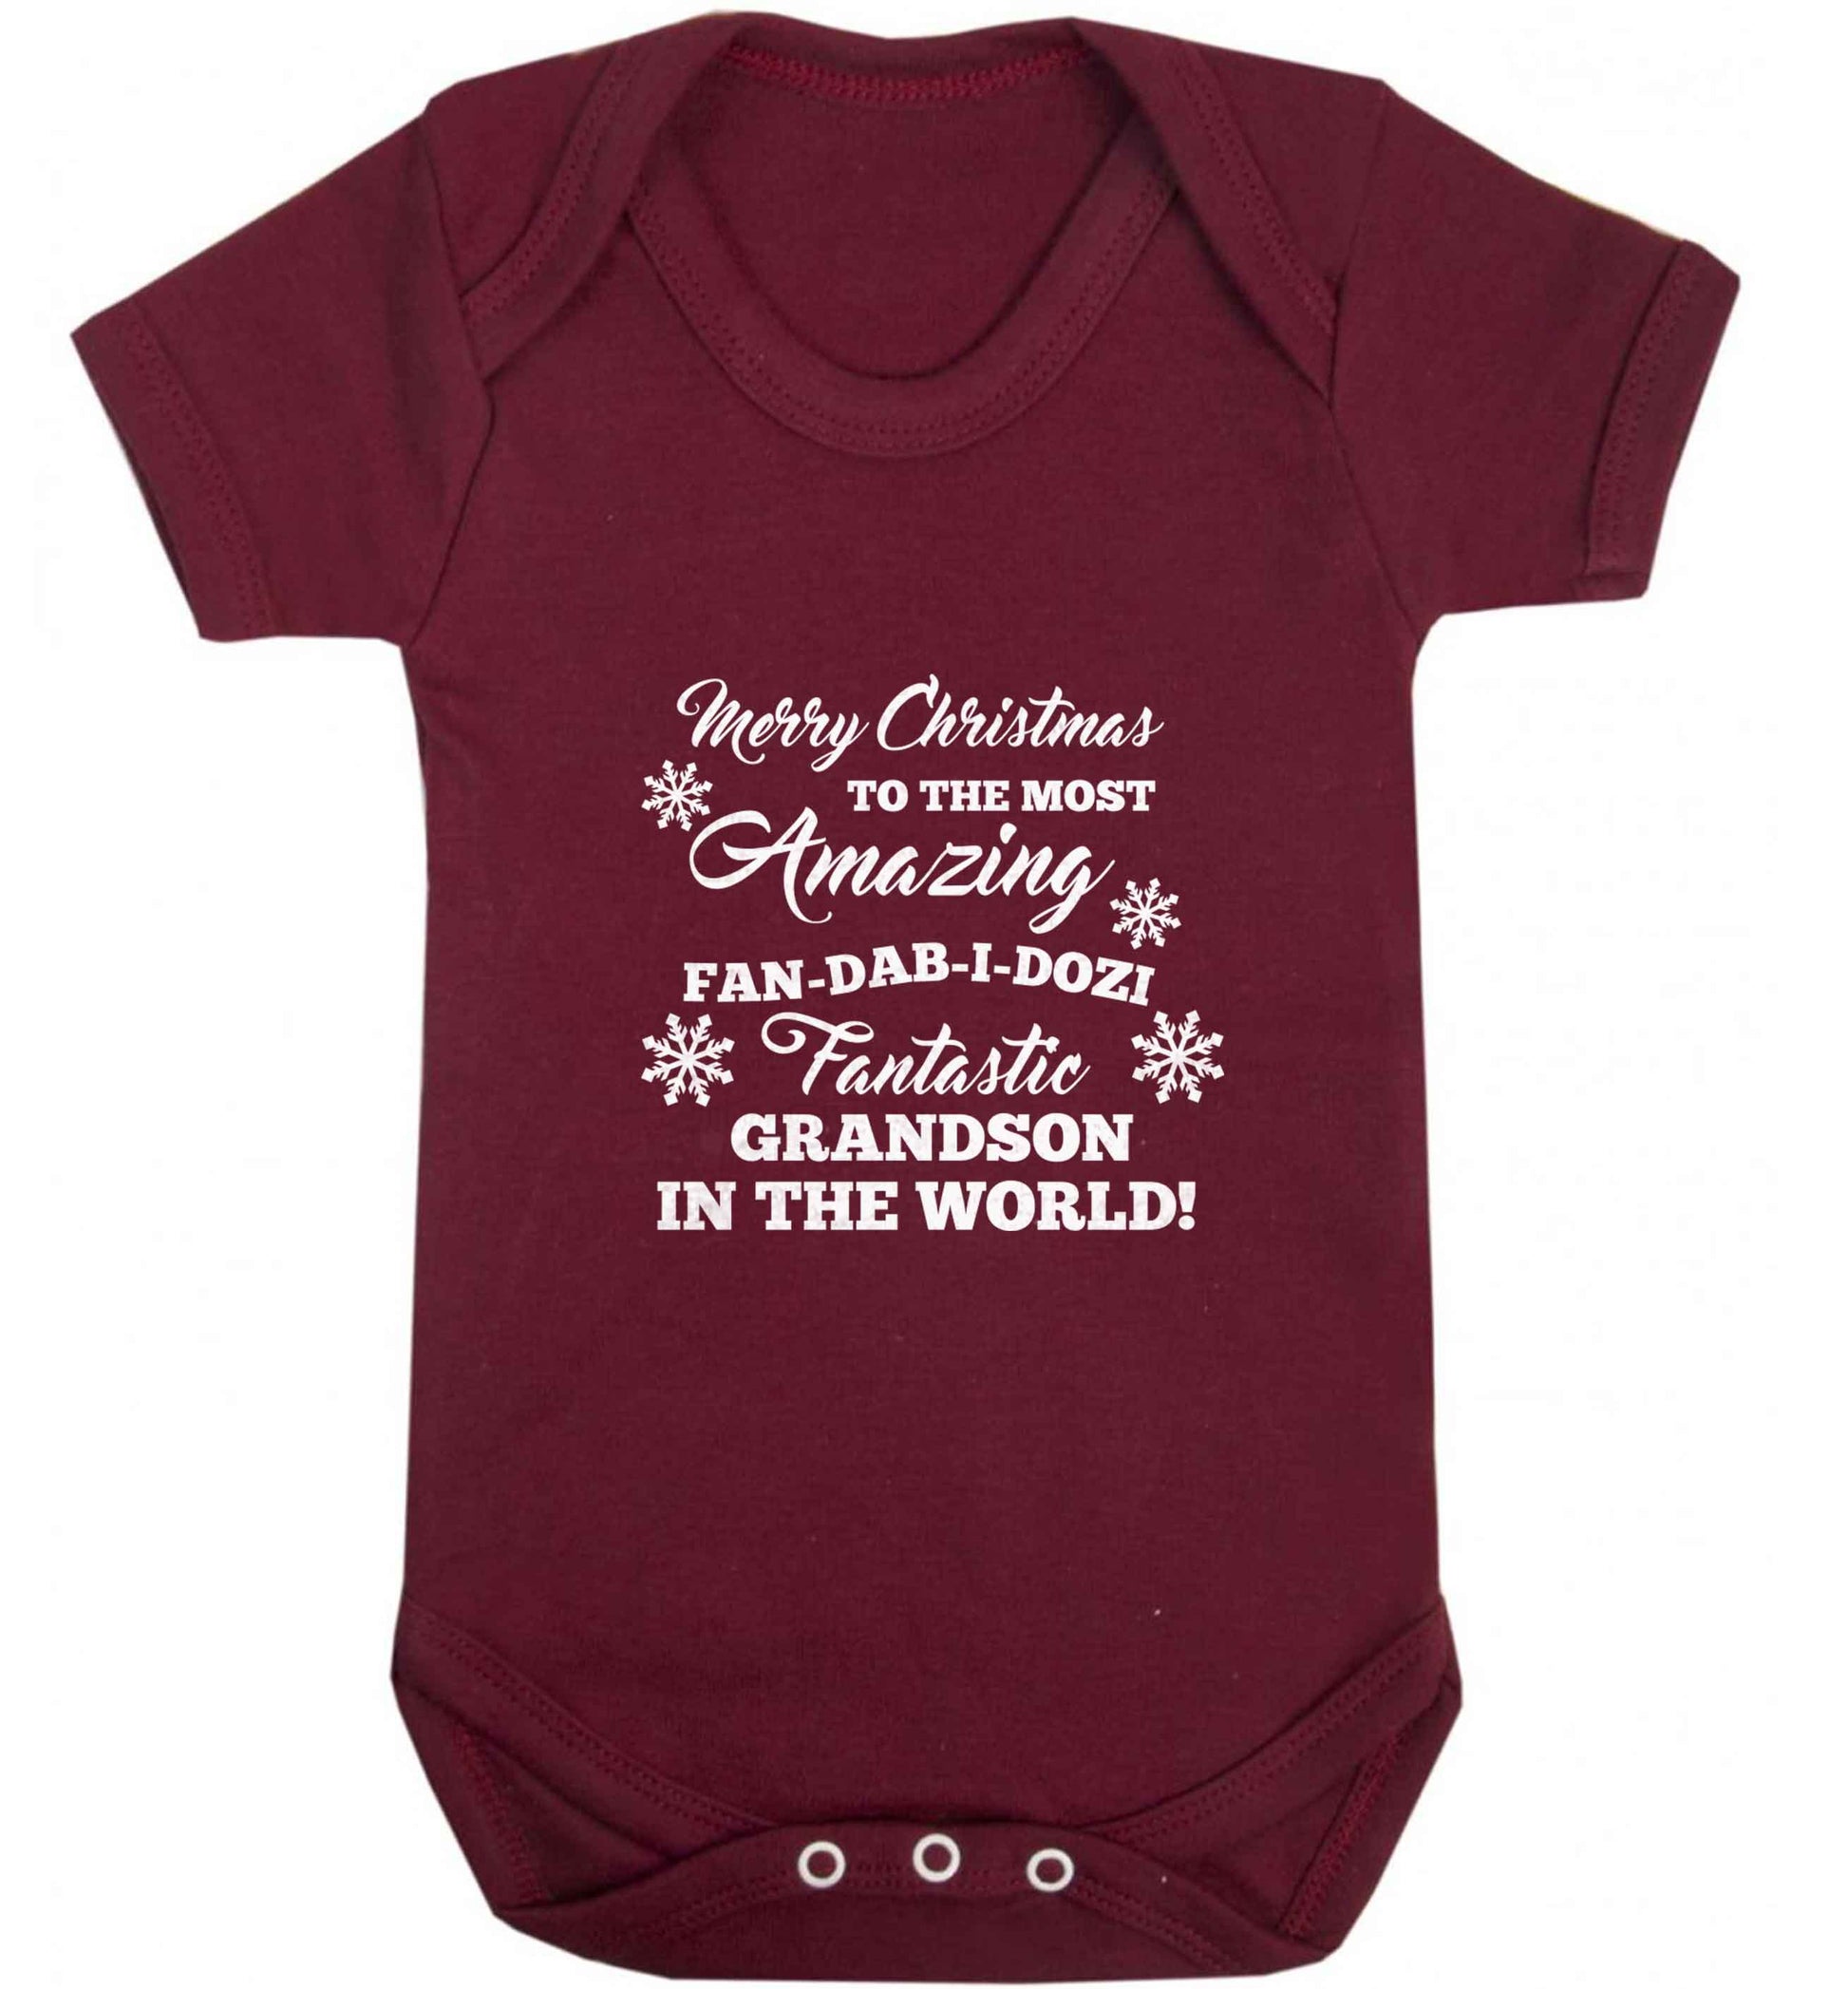 Merry Christmas to the most amazing fan-dab-i-dozi fantasic Grandson in the world baby vest maroon 18-24 months